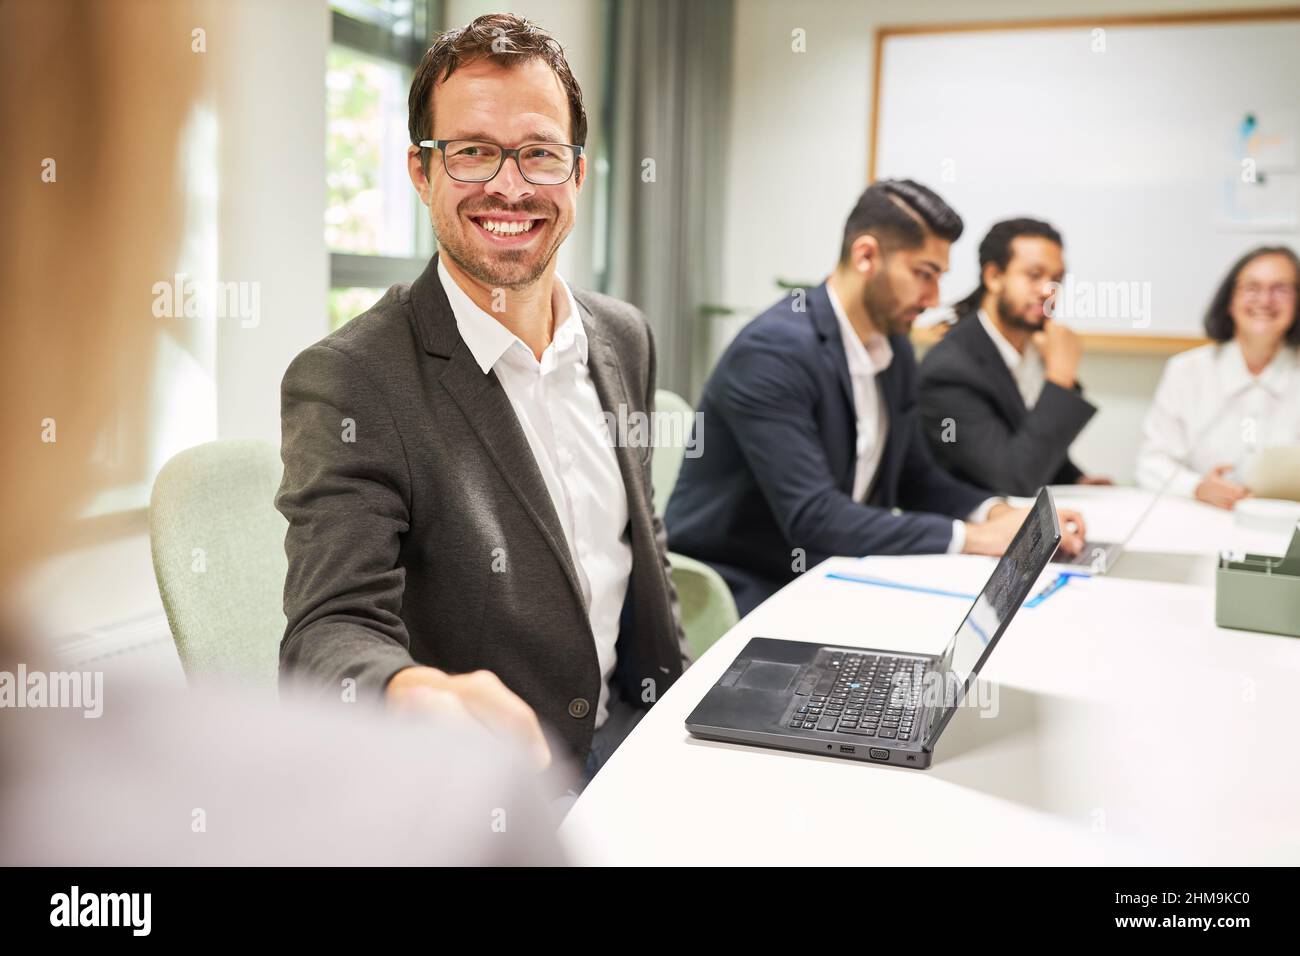 Happy businessman handshaking after a negotiation in a business meeting Stock Photo